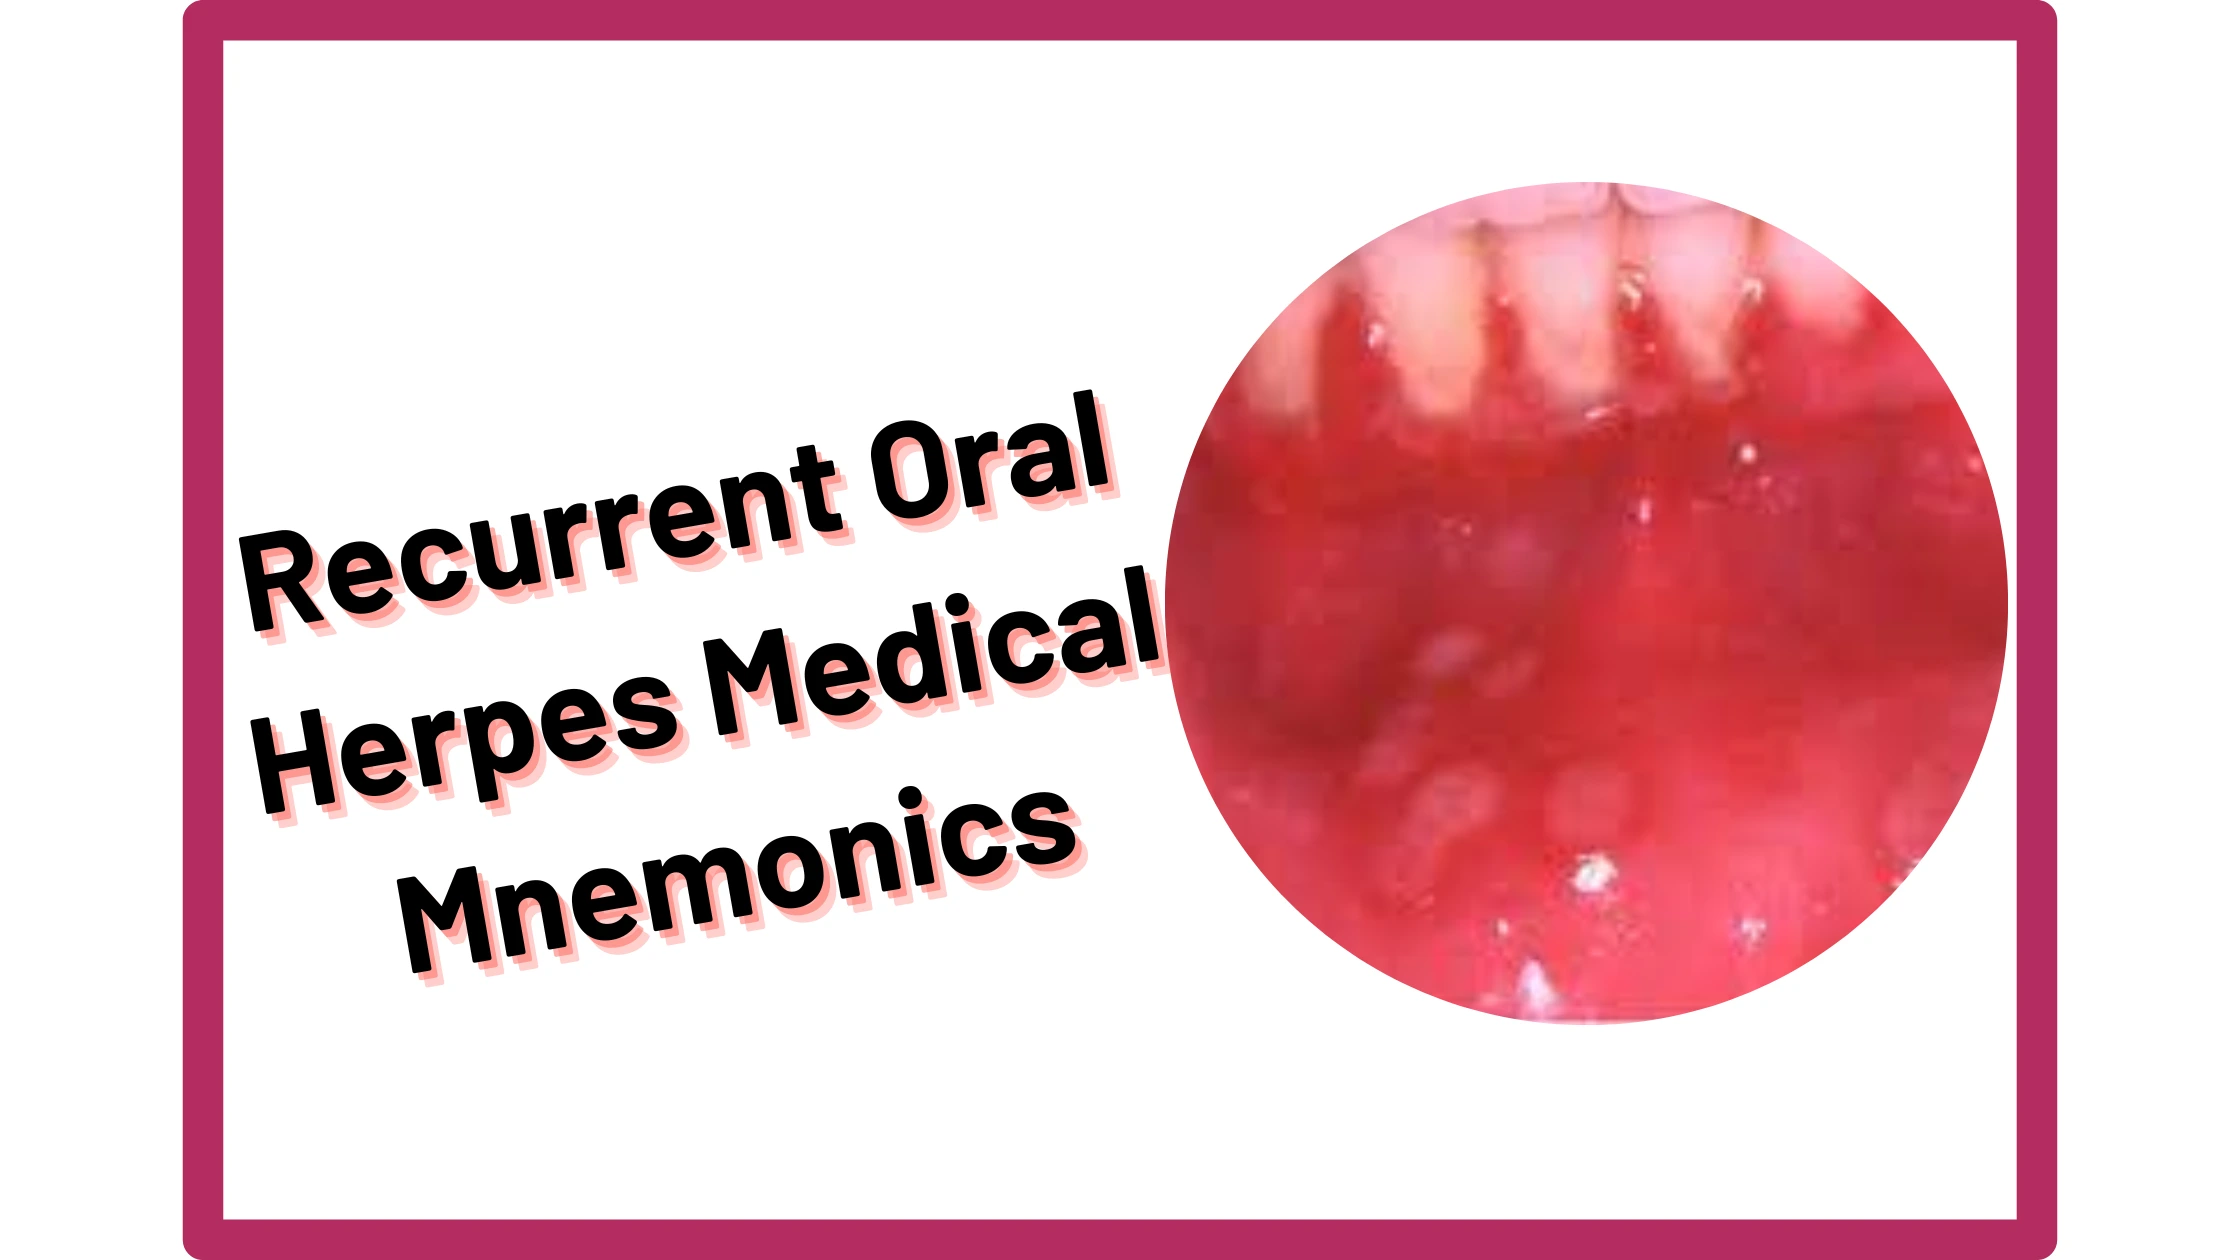 You are currently viewing [Very Cool] Mnemonic : Recurrent oral herpes Signs & Symptoms